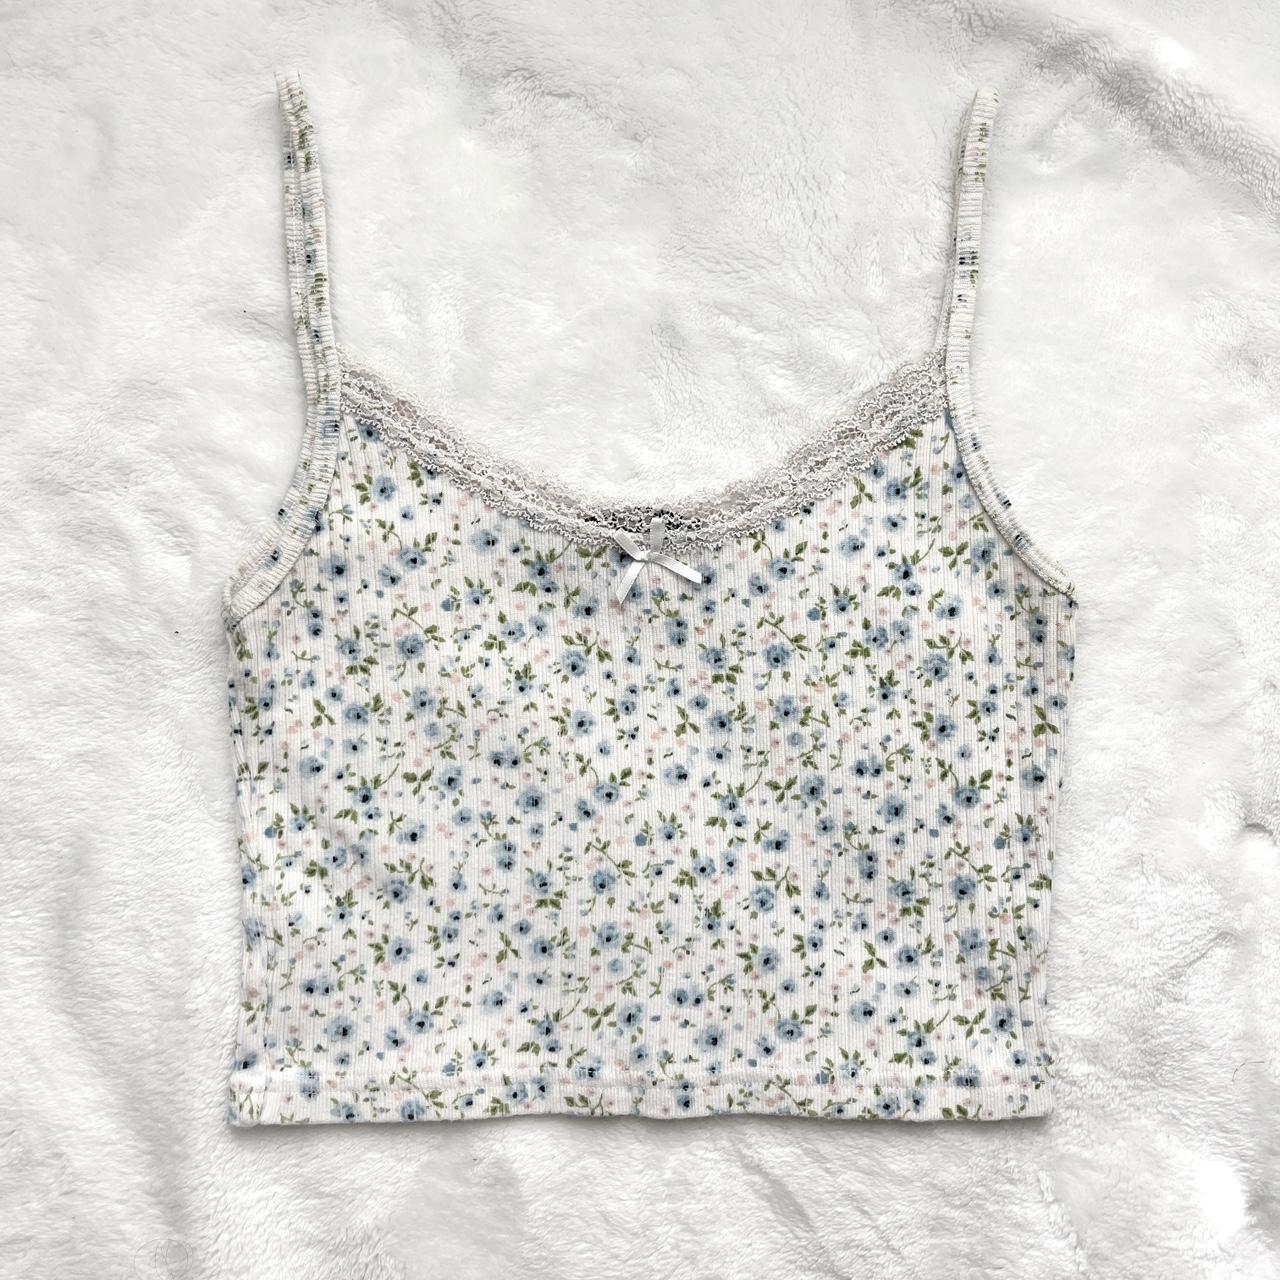 Terra and sky‎ 2x floral blouse Sleeveless floral - Depop